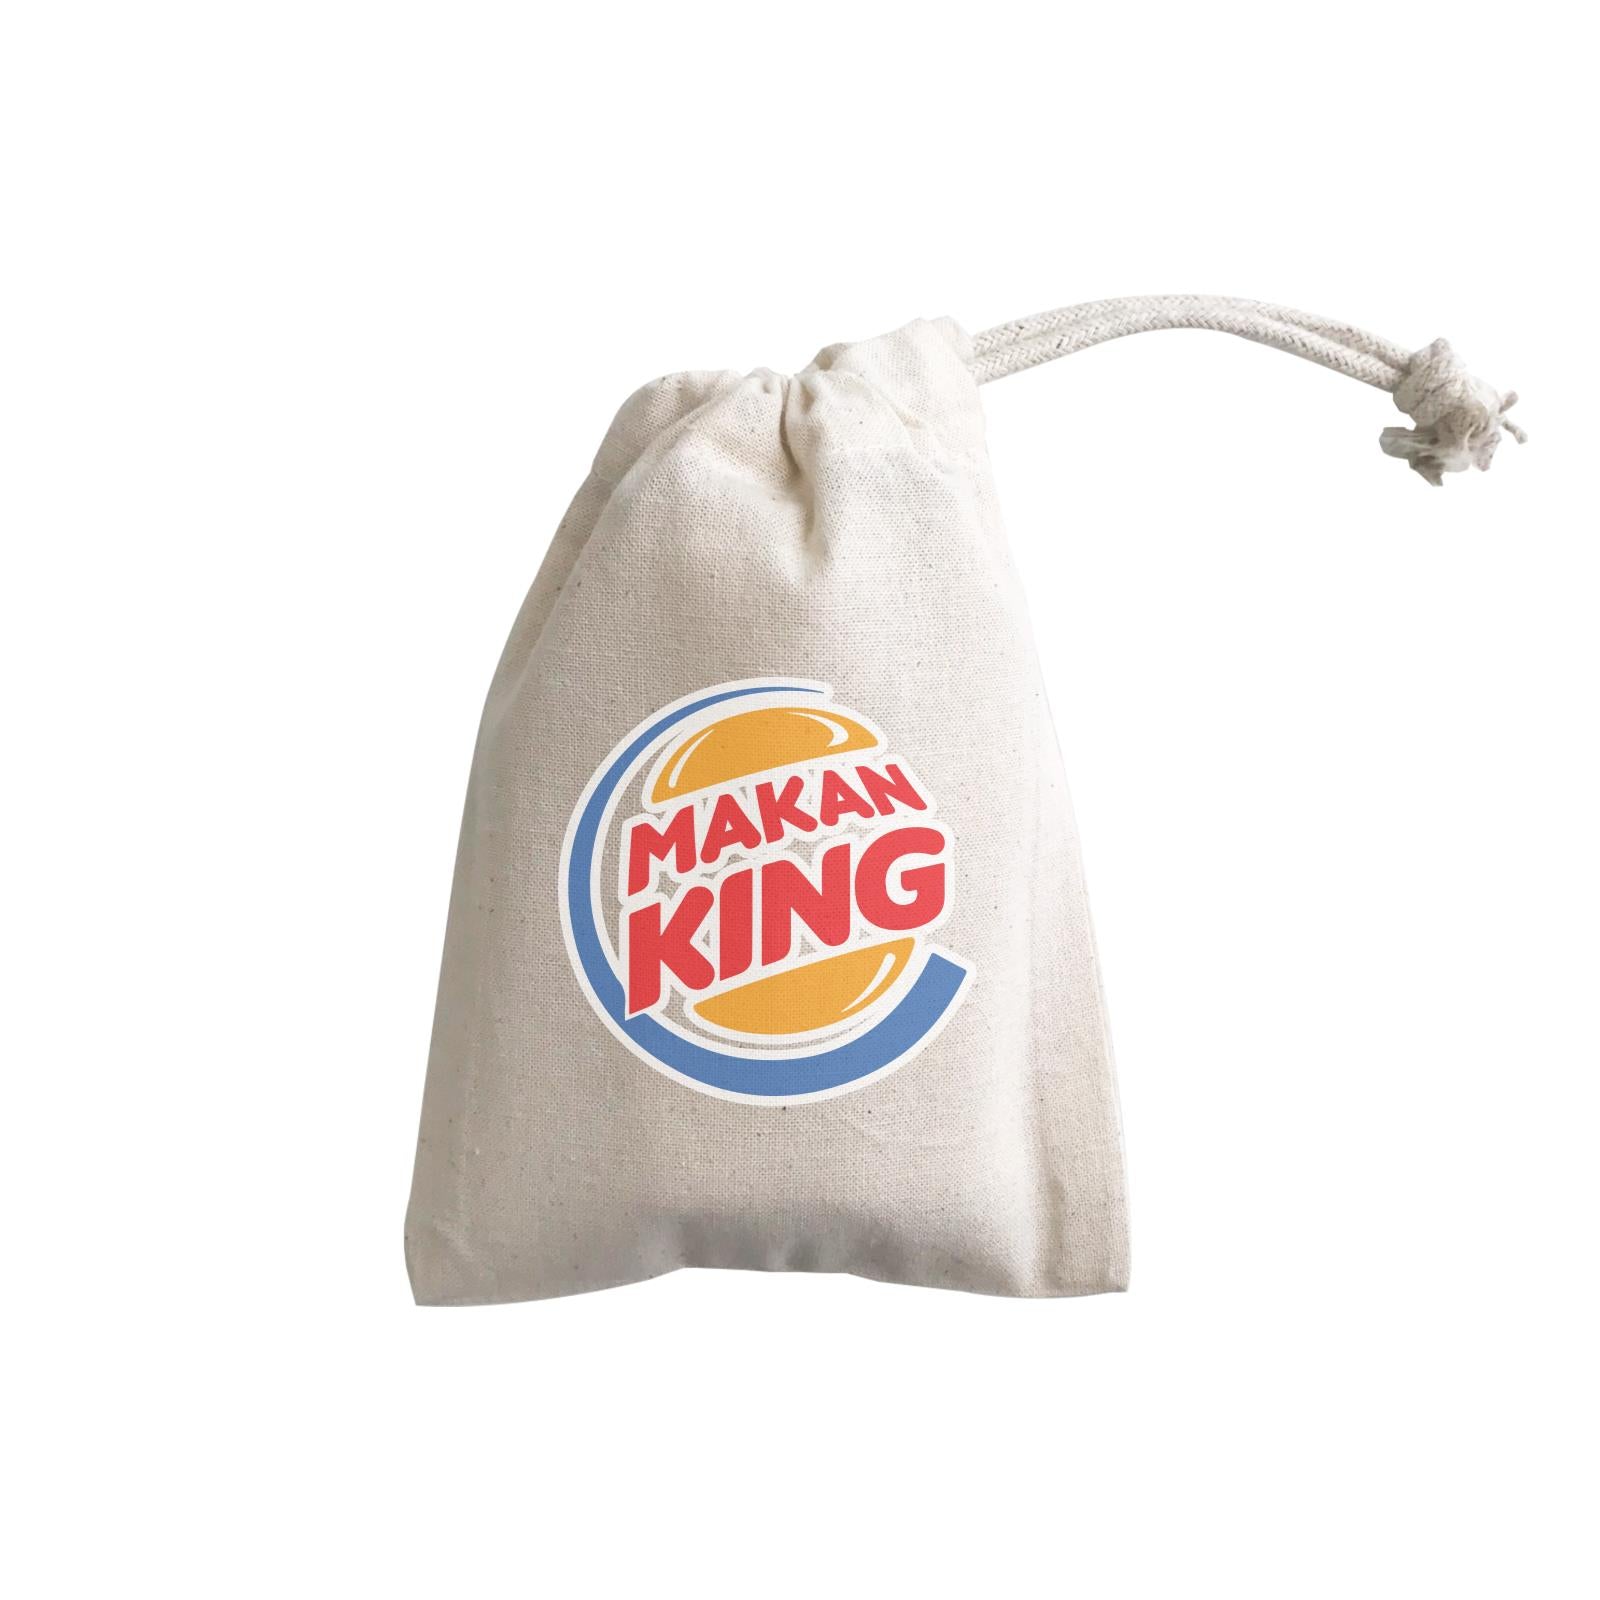 Slang Statement Makan King GP Gift Pouch